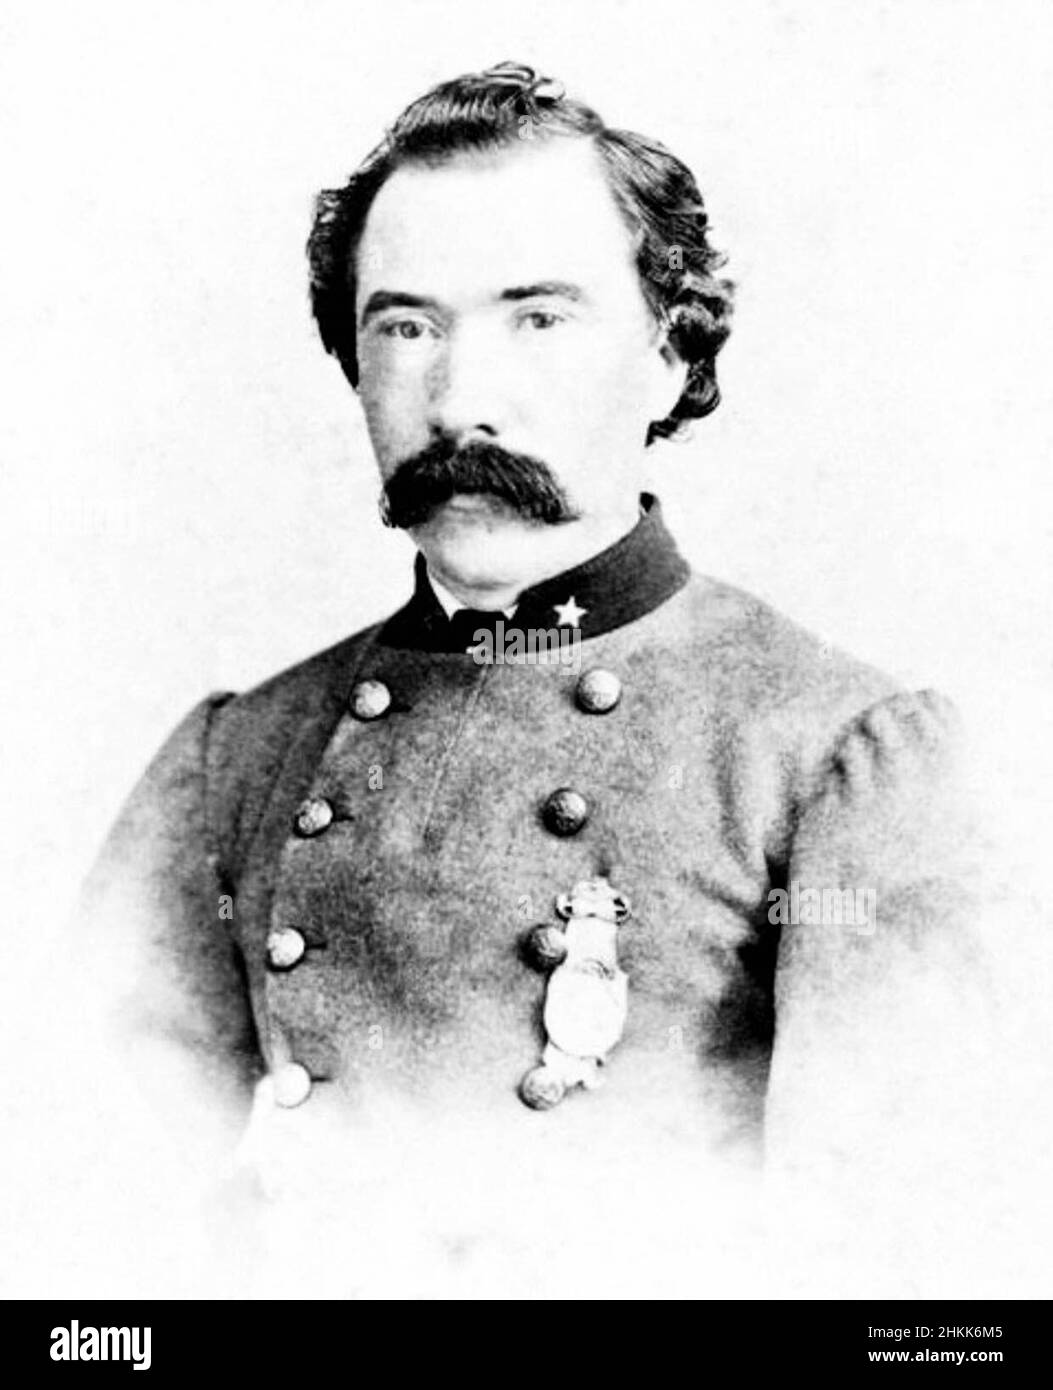 Richard William 'Dick' Dowling (baptized 14 January 1837 – 23 September 1867) was an artillery officer of the Confederate States Army who achieved distinction as commander at the battle of Sabine Pass (1863), Stock Photo